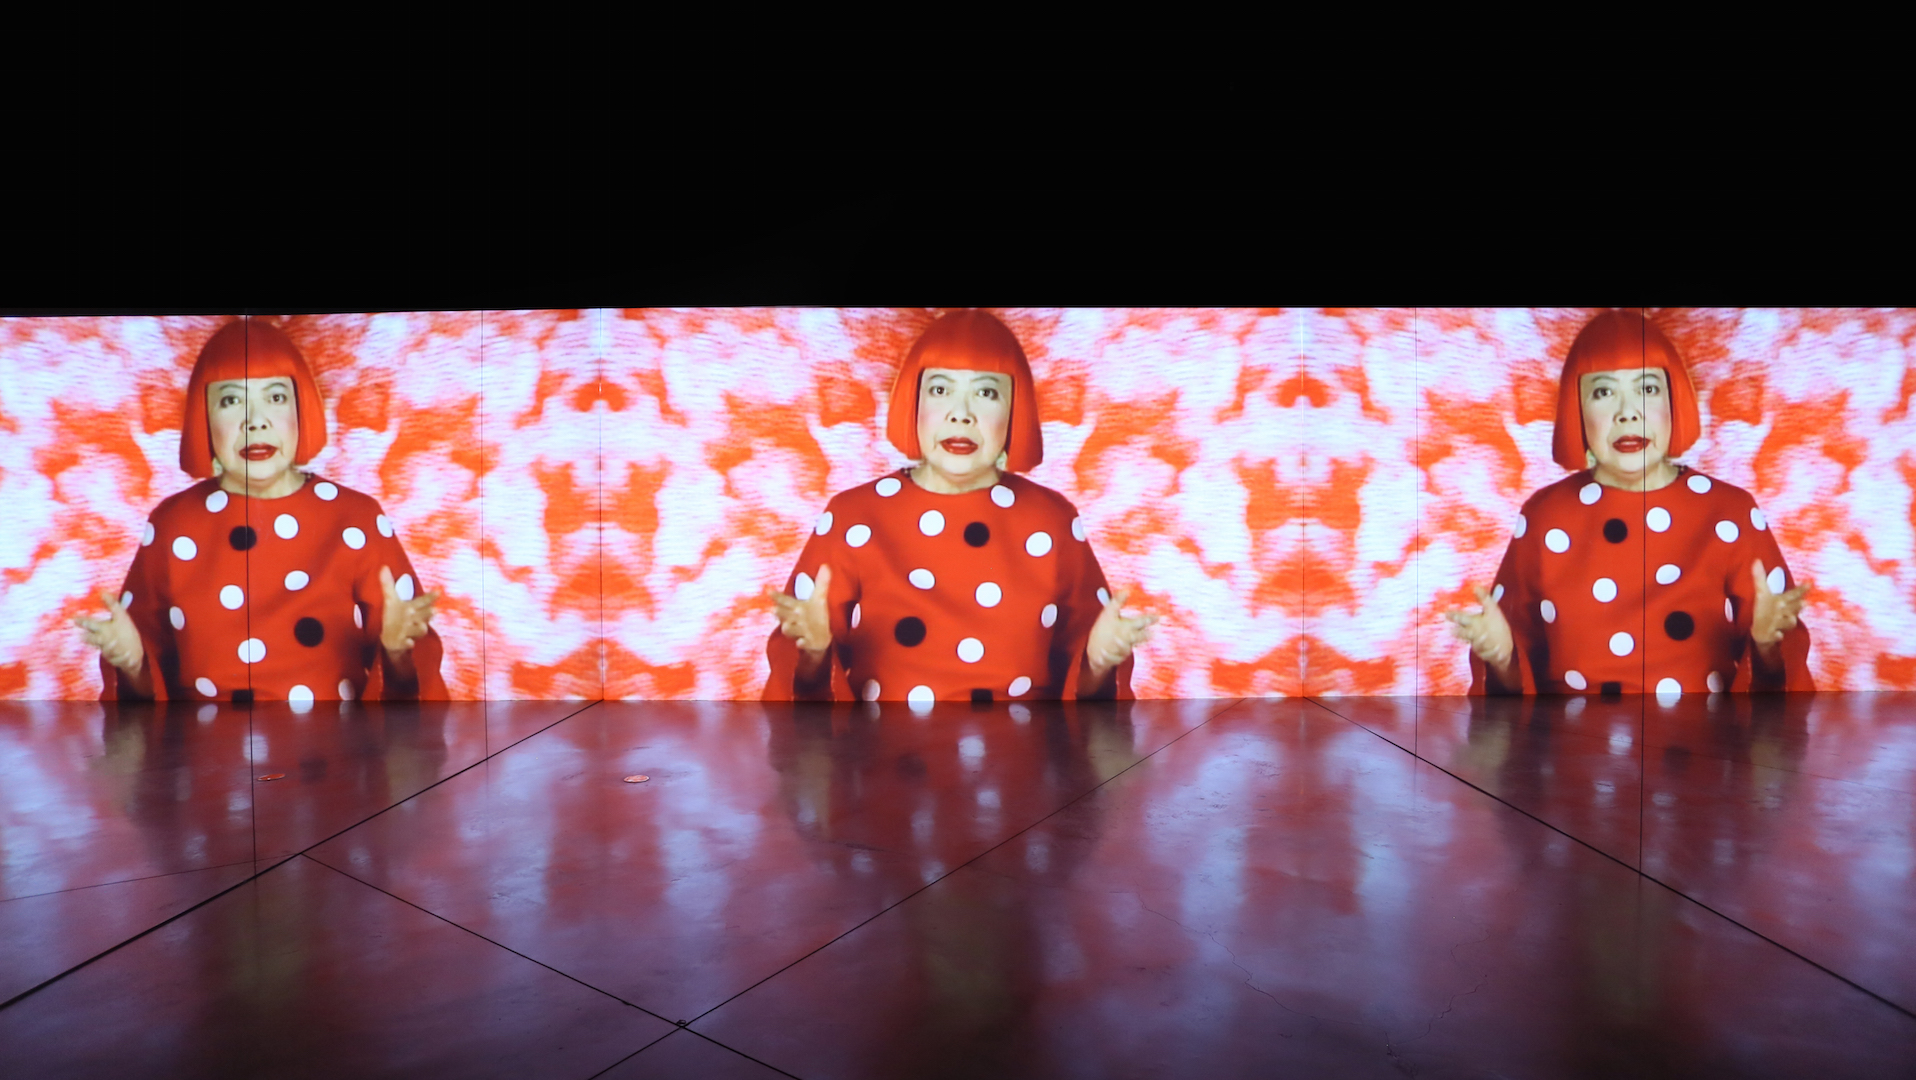 Installation of Yayoi Kusama's mannequin covers the exterior of